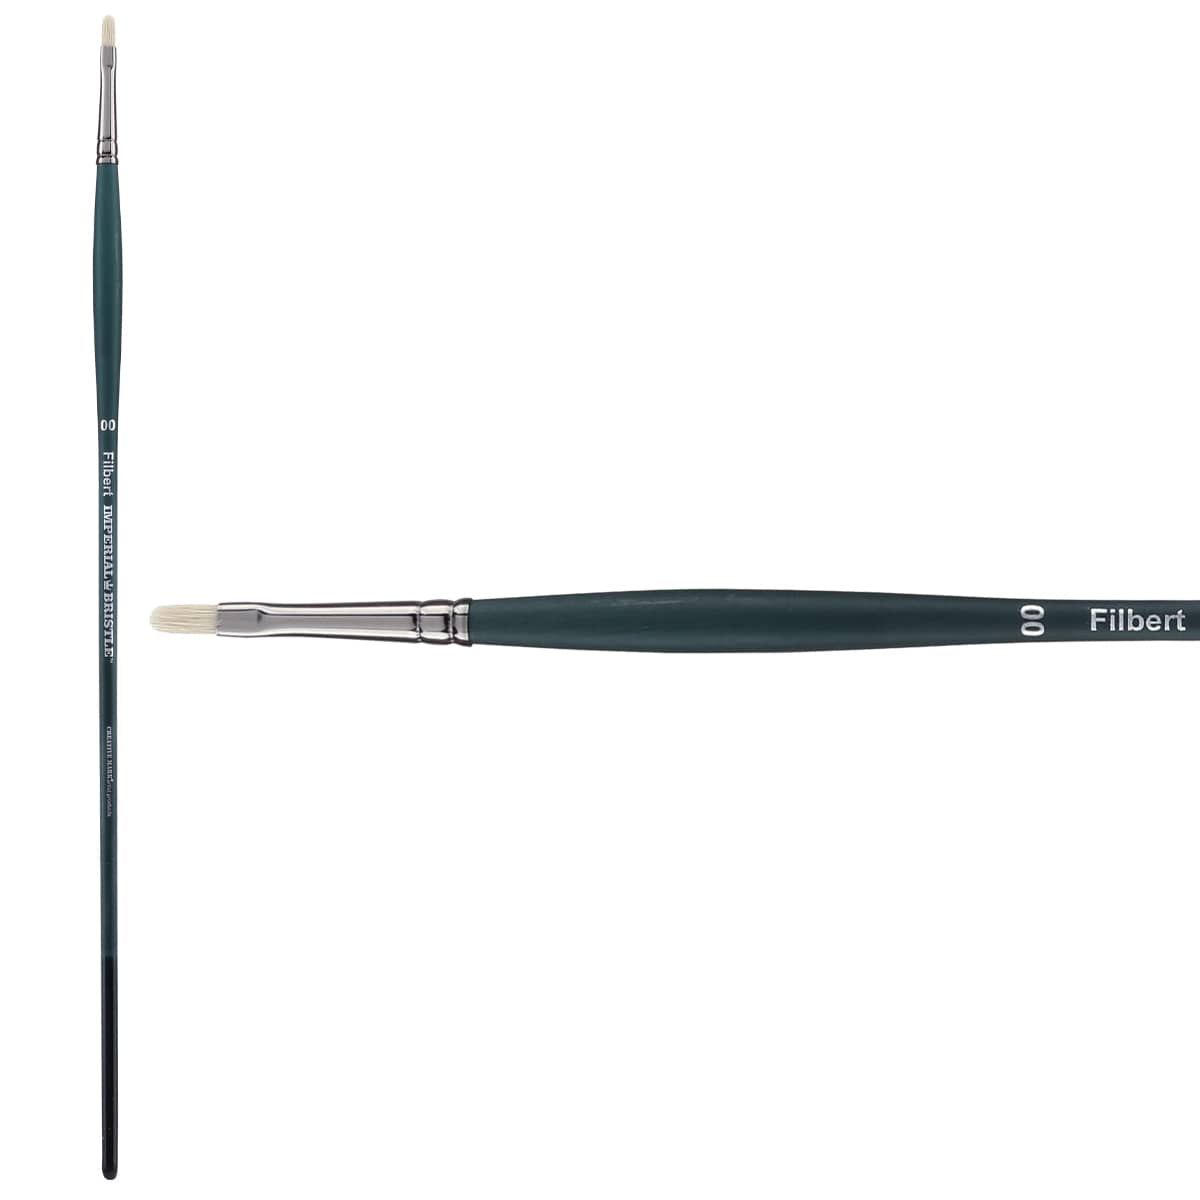 Imperial Professional Brush - Size 2x0 Filbert